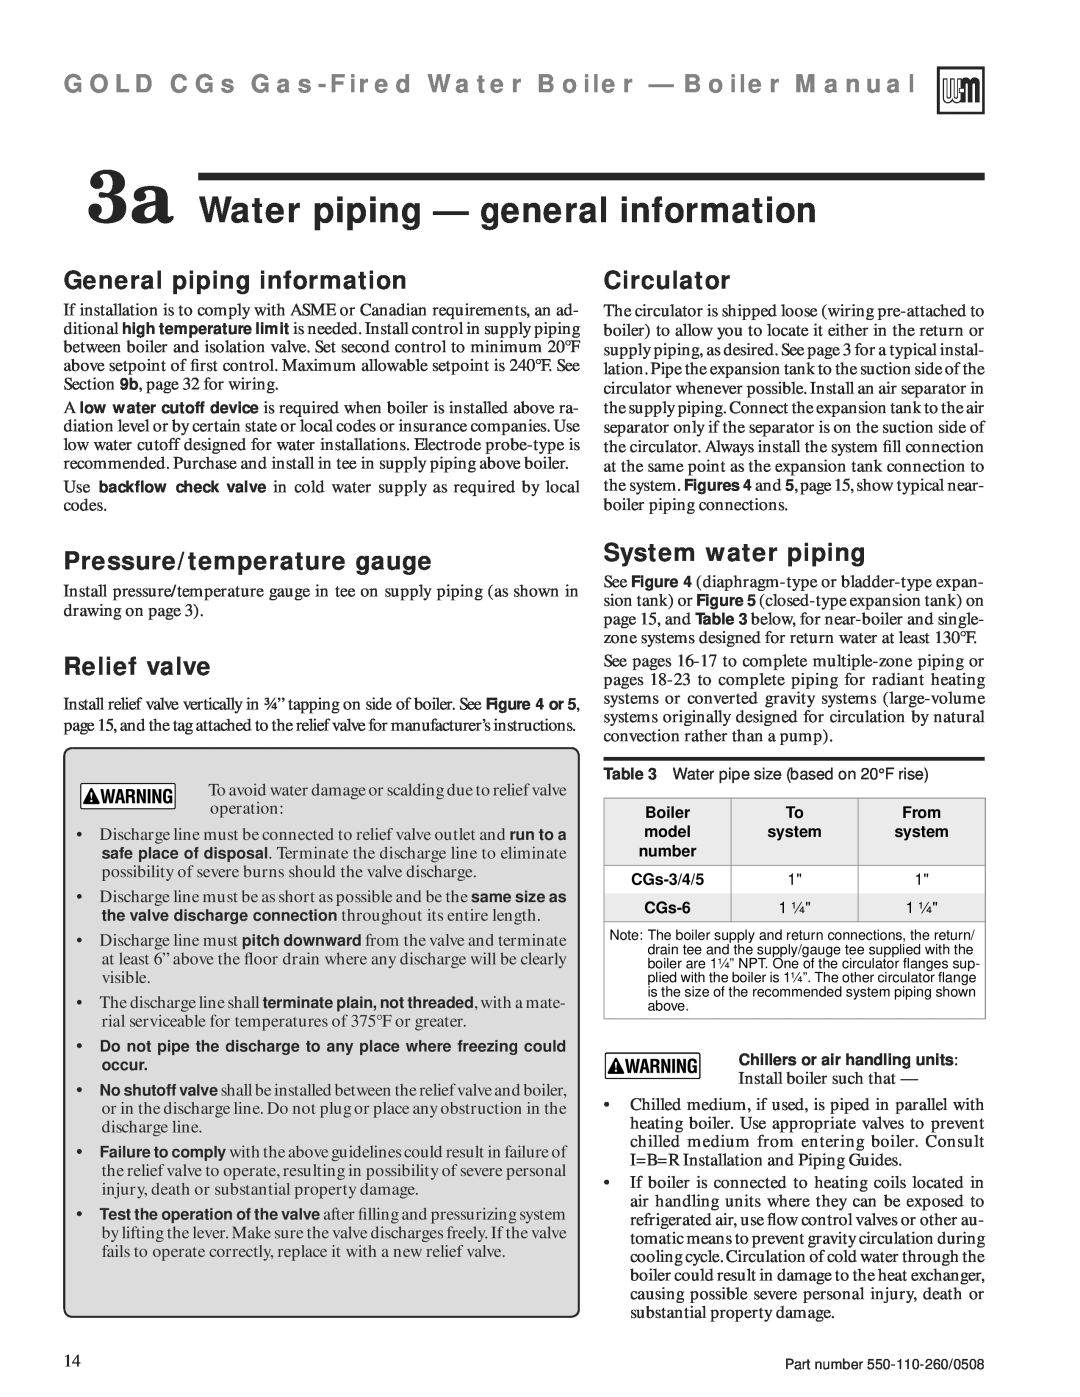 Weil-McLain 550-110-260/0508 3a Water piping — general information, General piping information, Circulator, Relief valve 